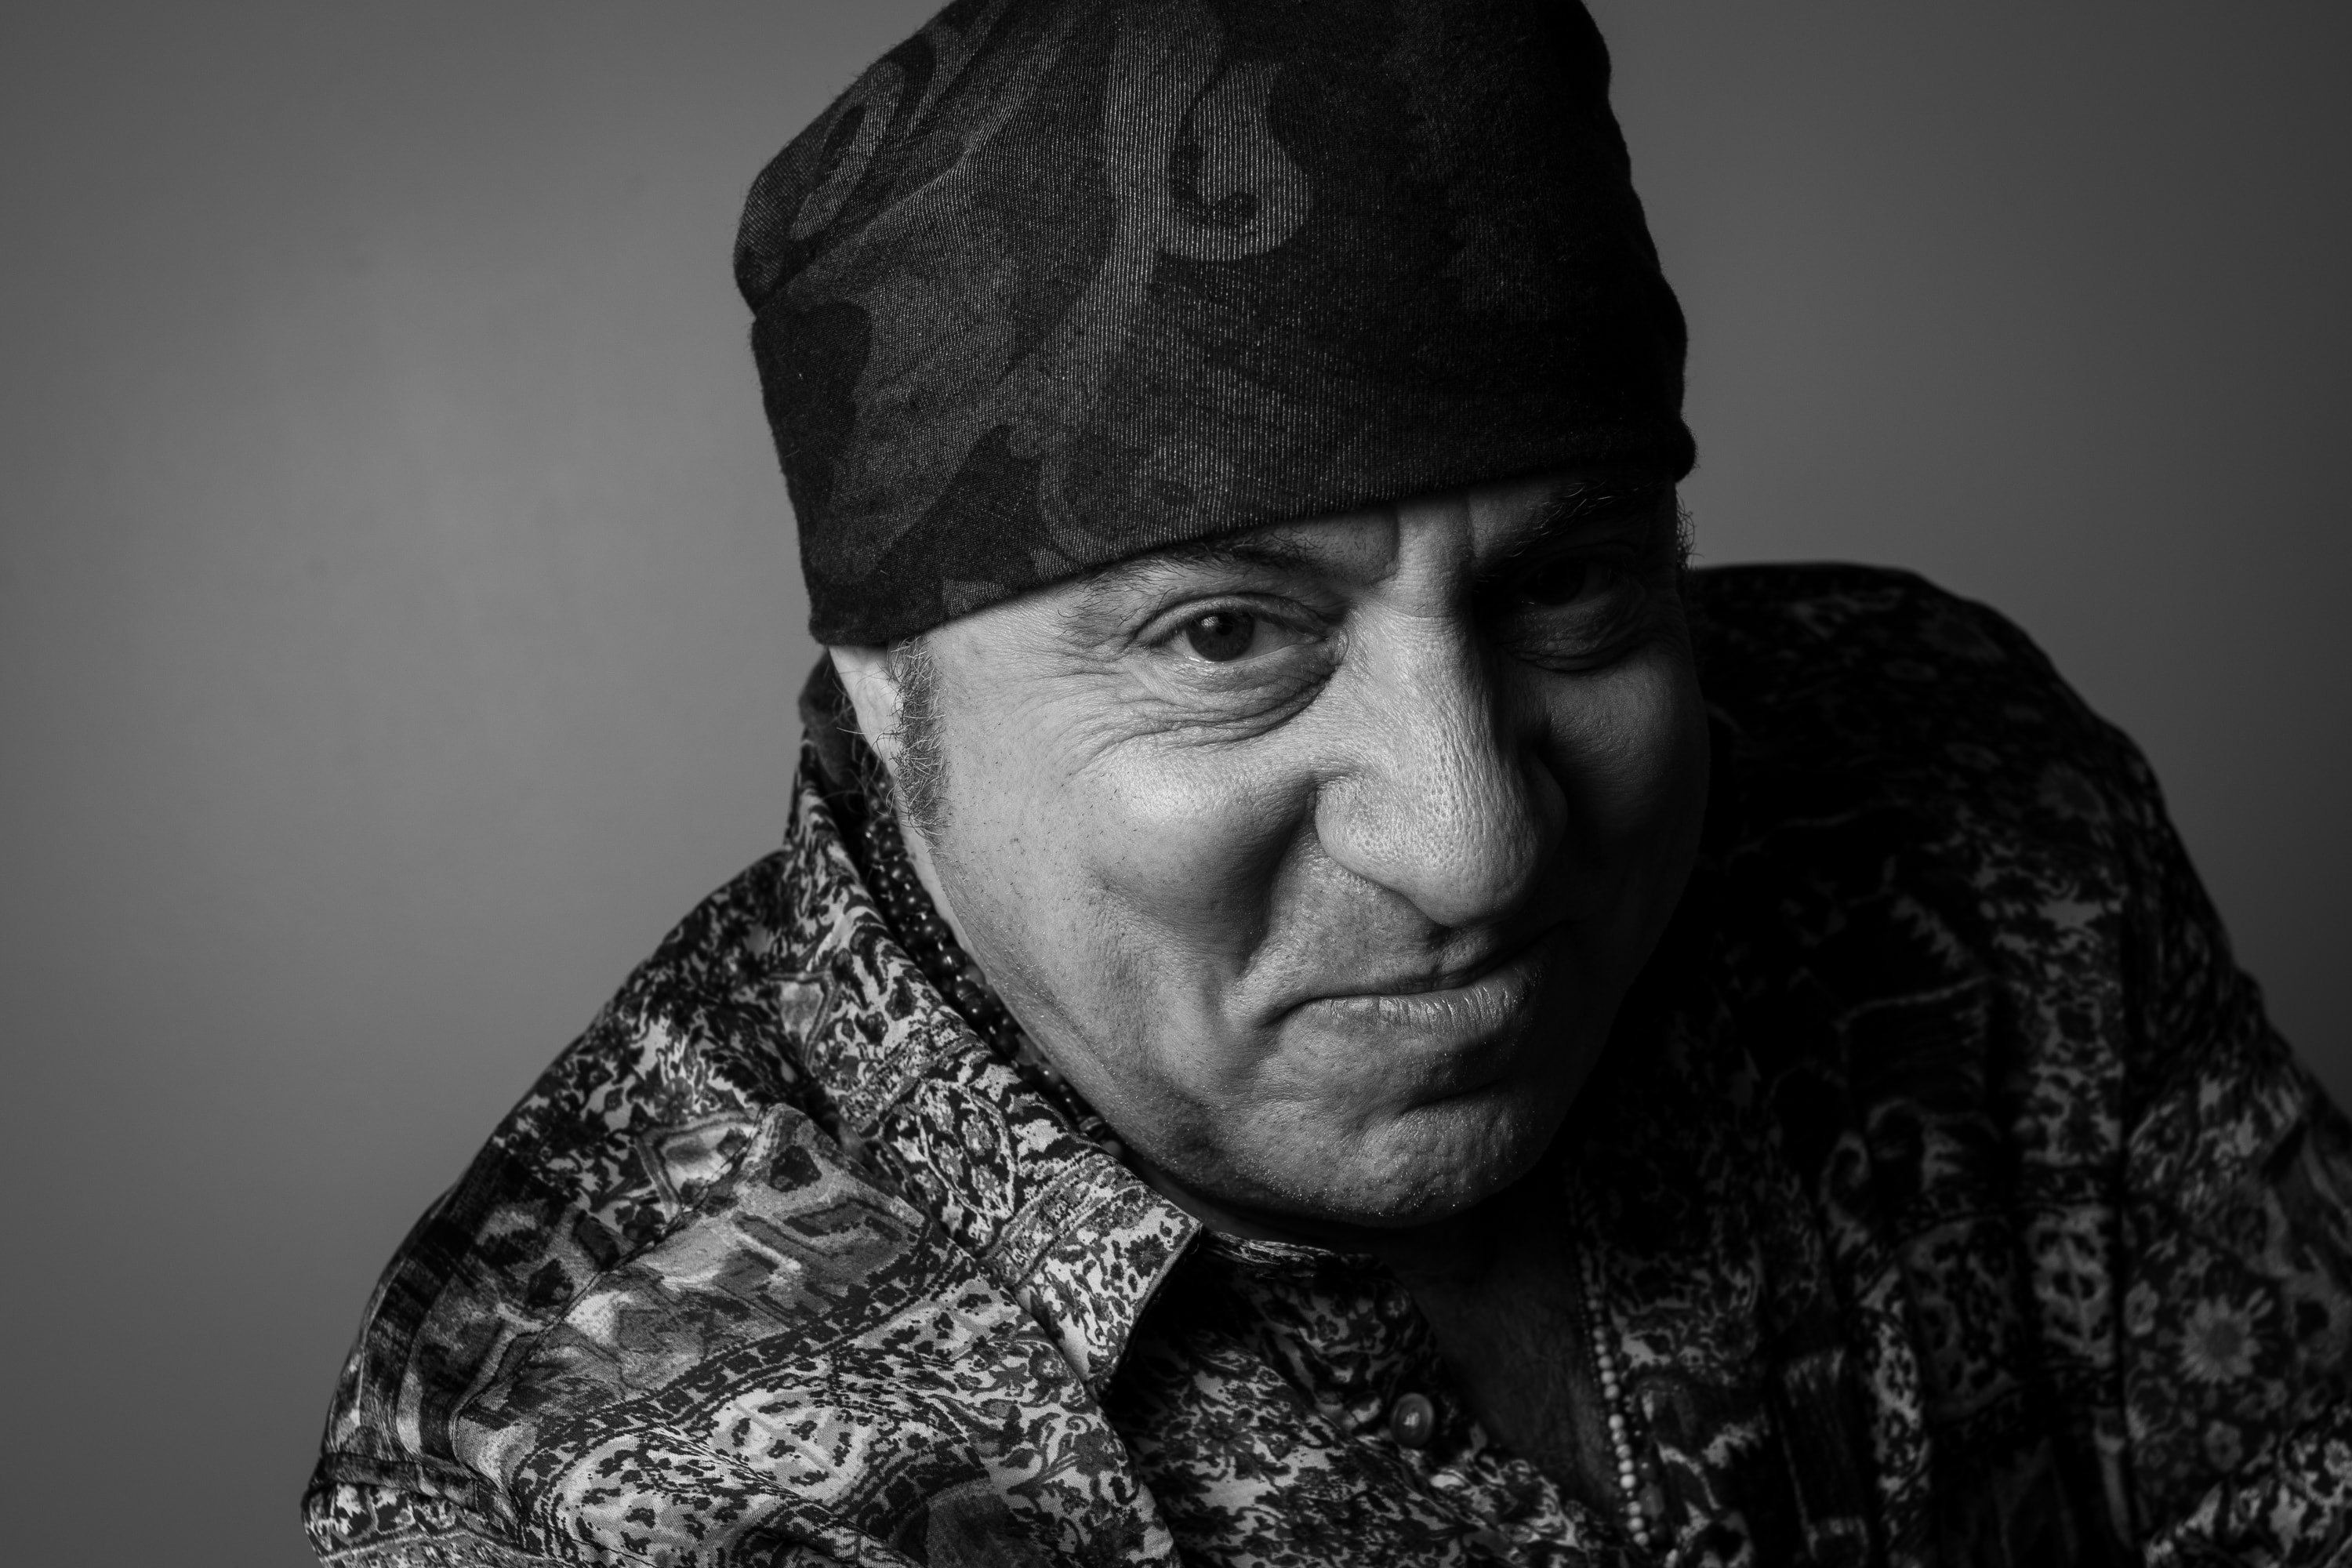 Steven Van Zandt, also known as Little Steven, poses for a photo before speaking with Bandier Students at the S.I. Newhouse School of Public Communications on March 18, 2019